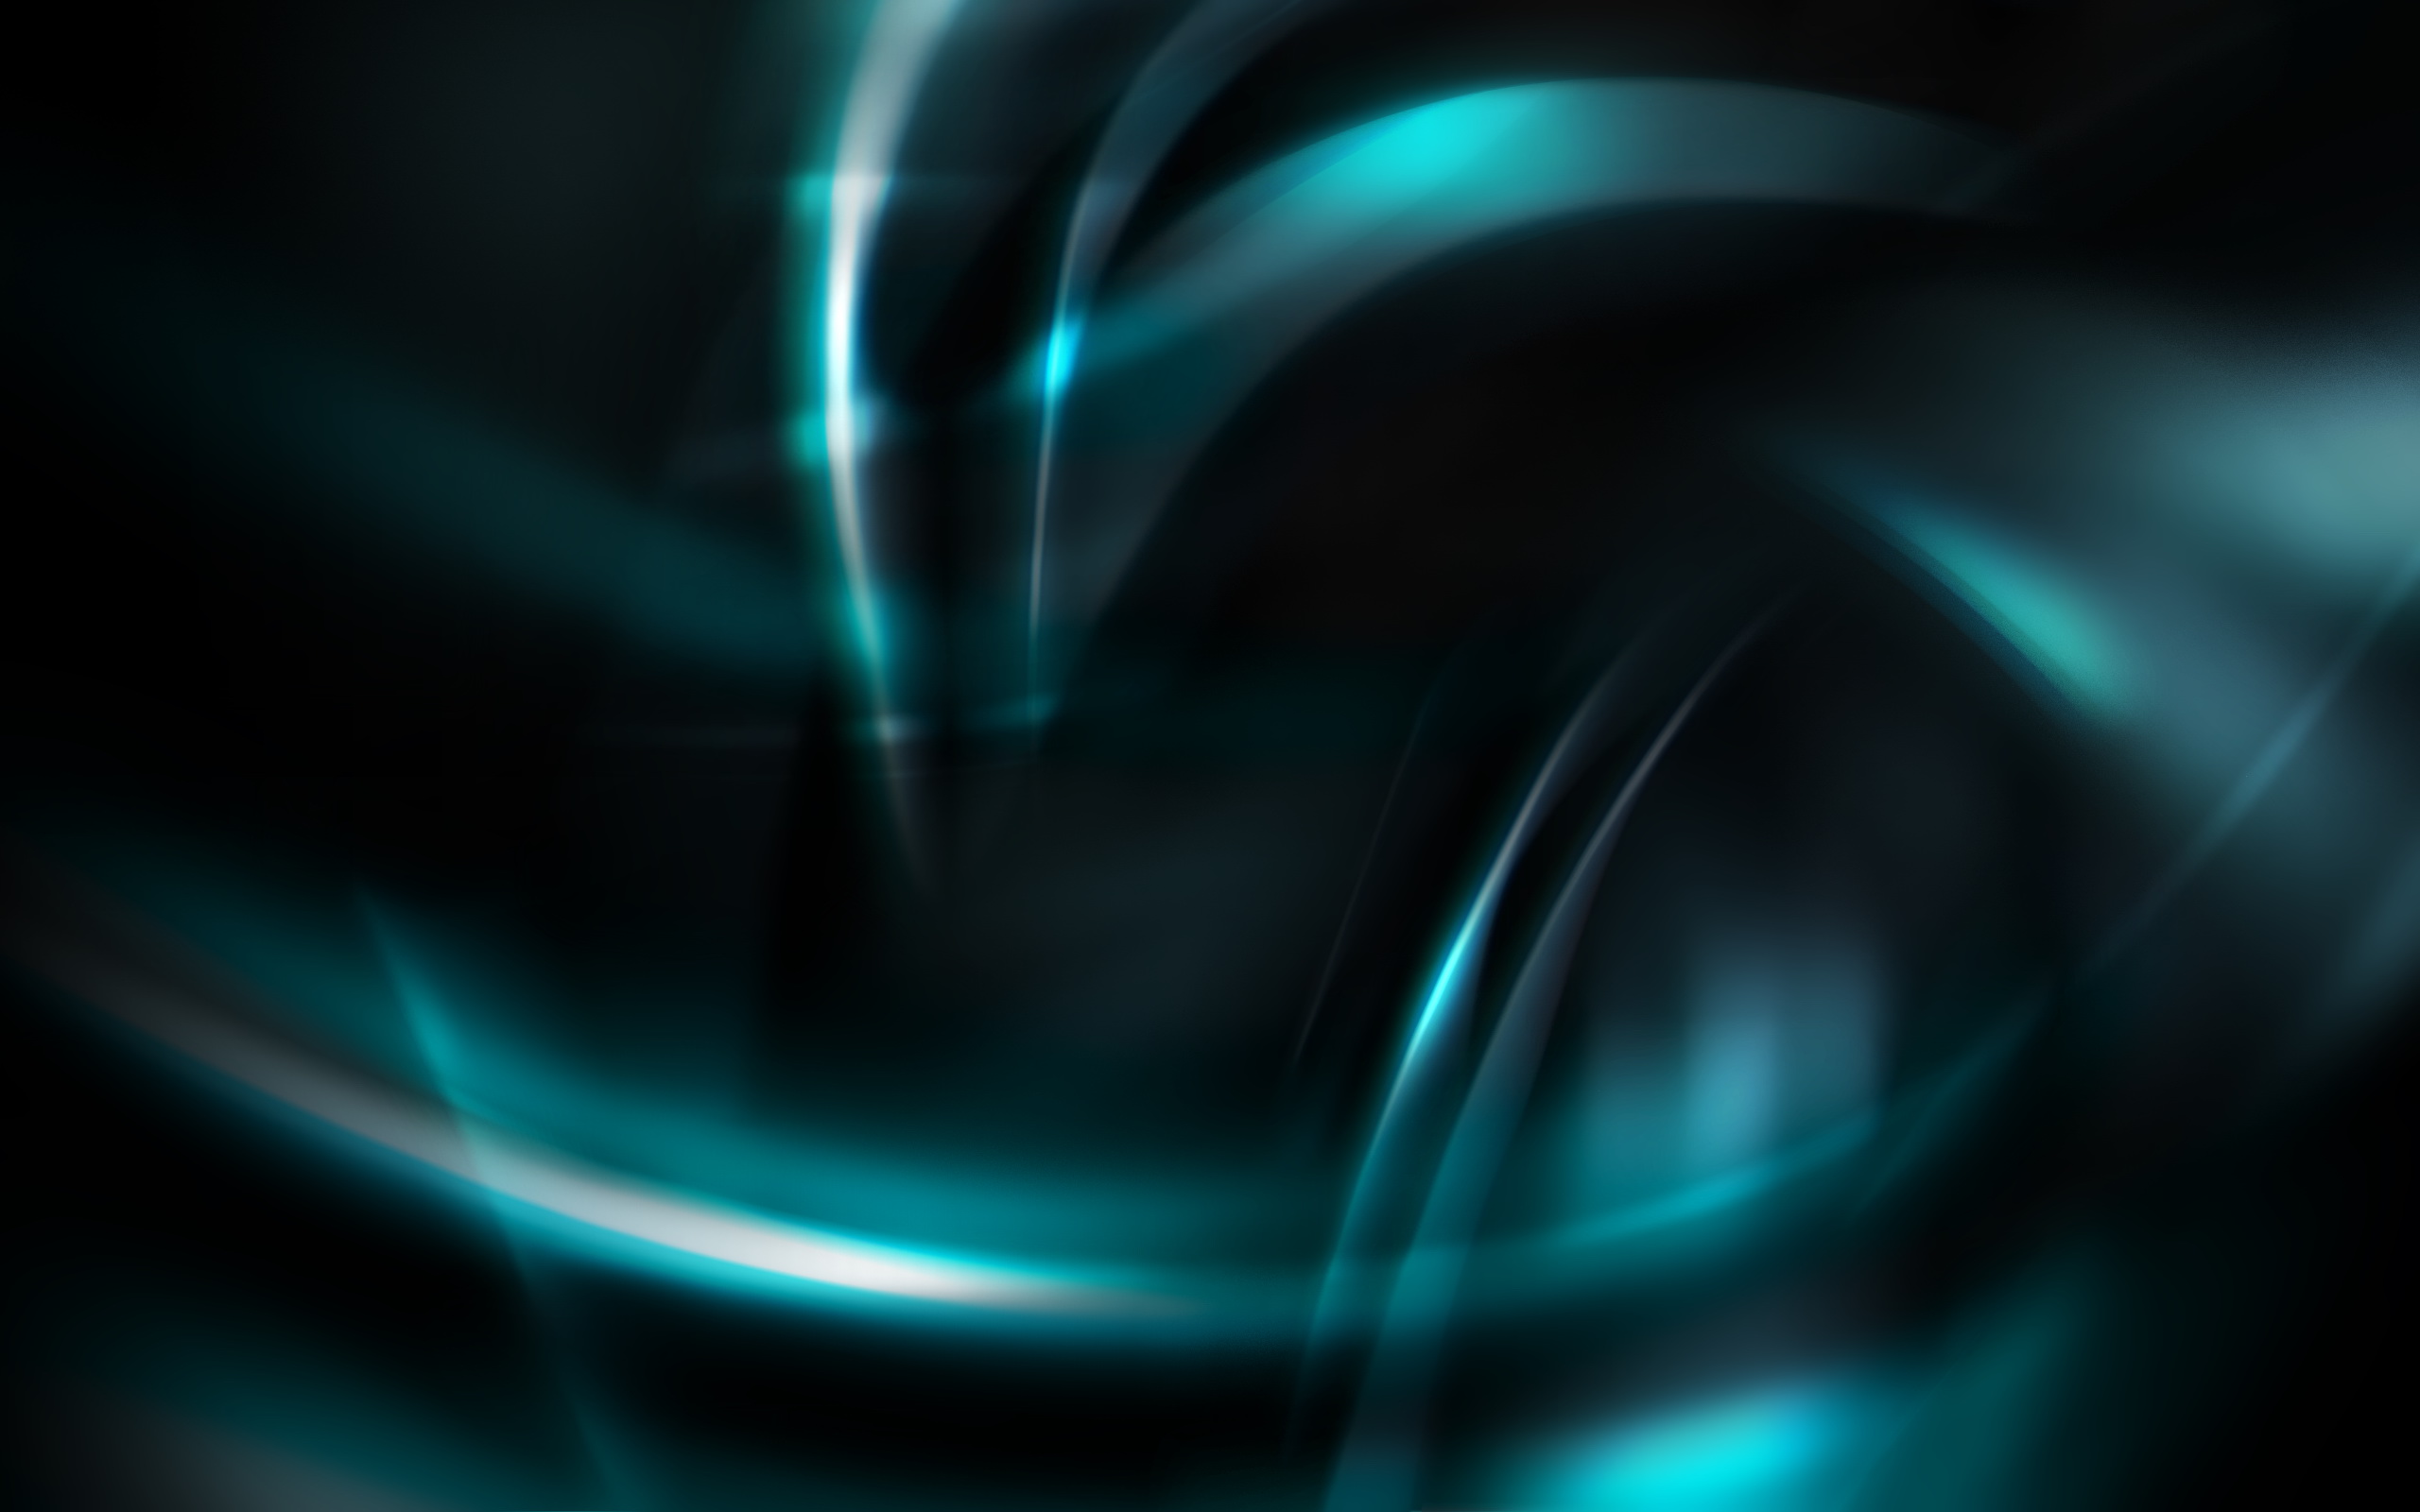 Turquoise HD Wallpaper | Background Image | 2560x1600 | ID:440476 ...
